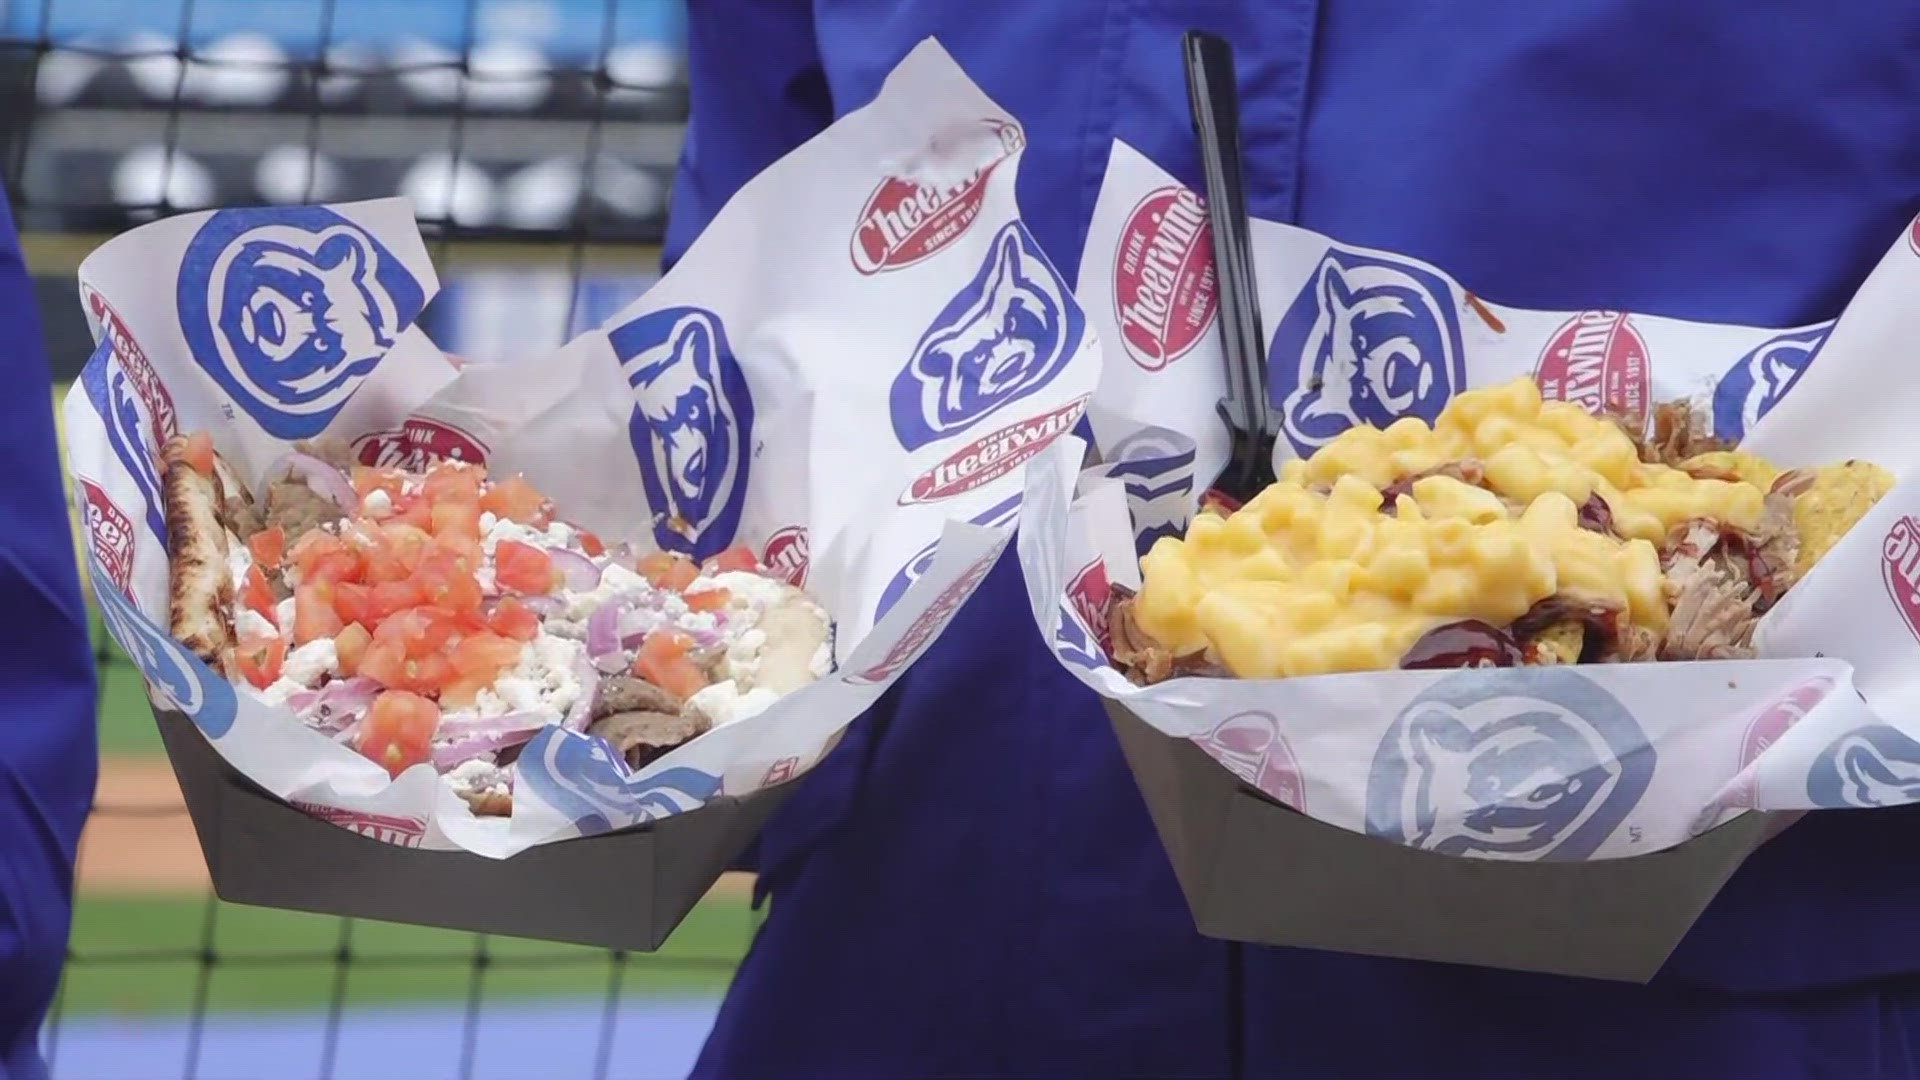 The Smokies are hitting a home run with their newest food options.